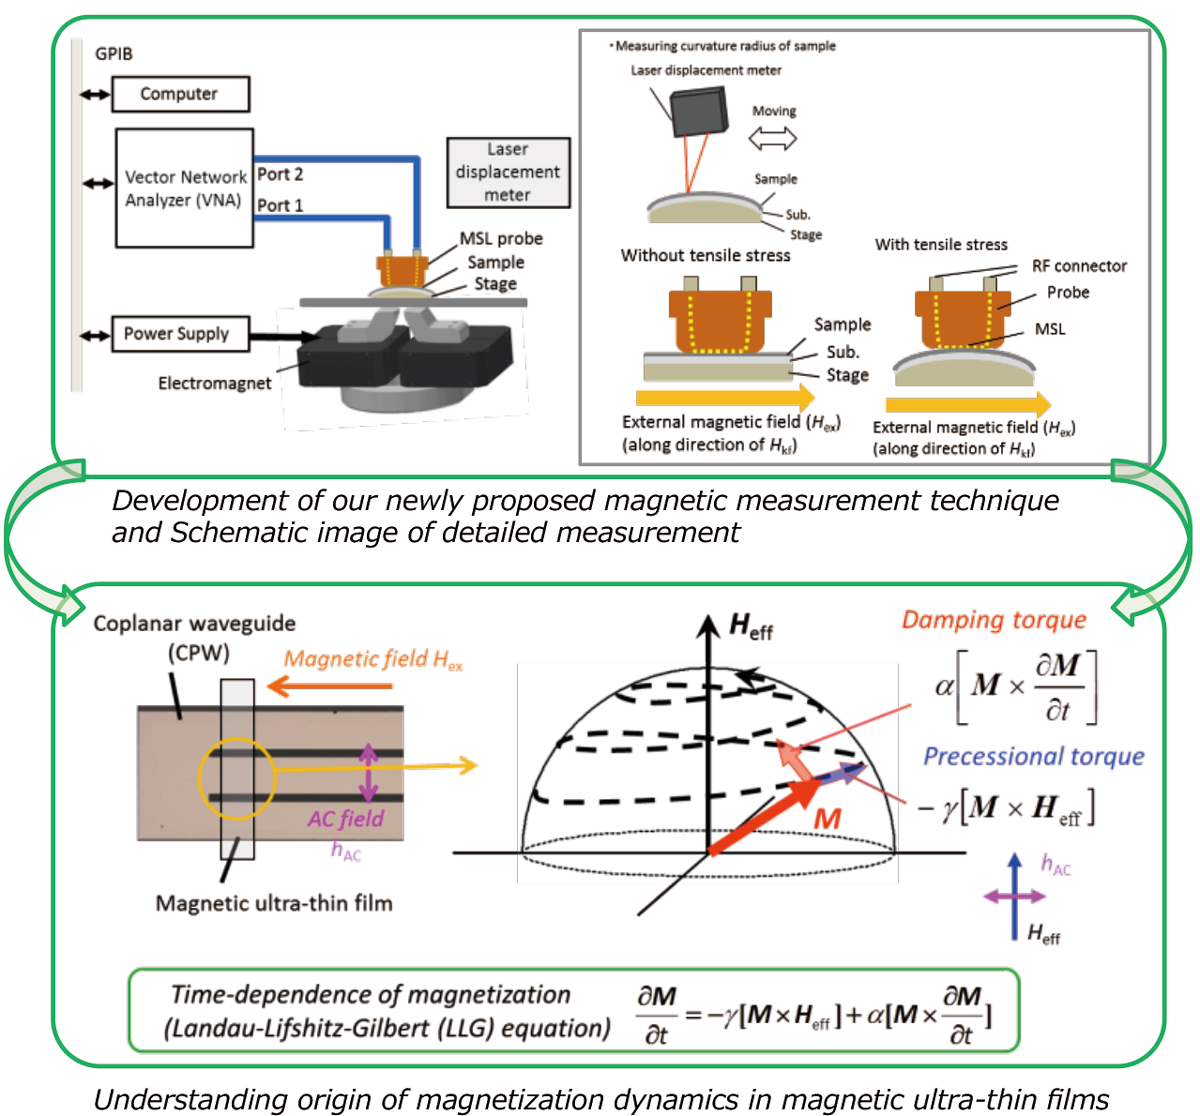 Study on magnetization dynamics of Co amorphous magnetic ultra-thin film